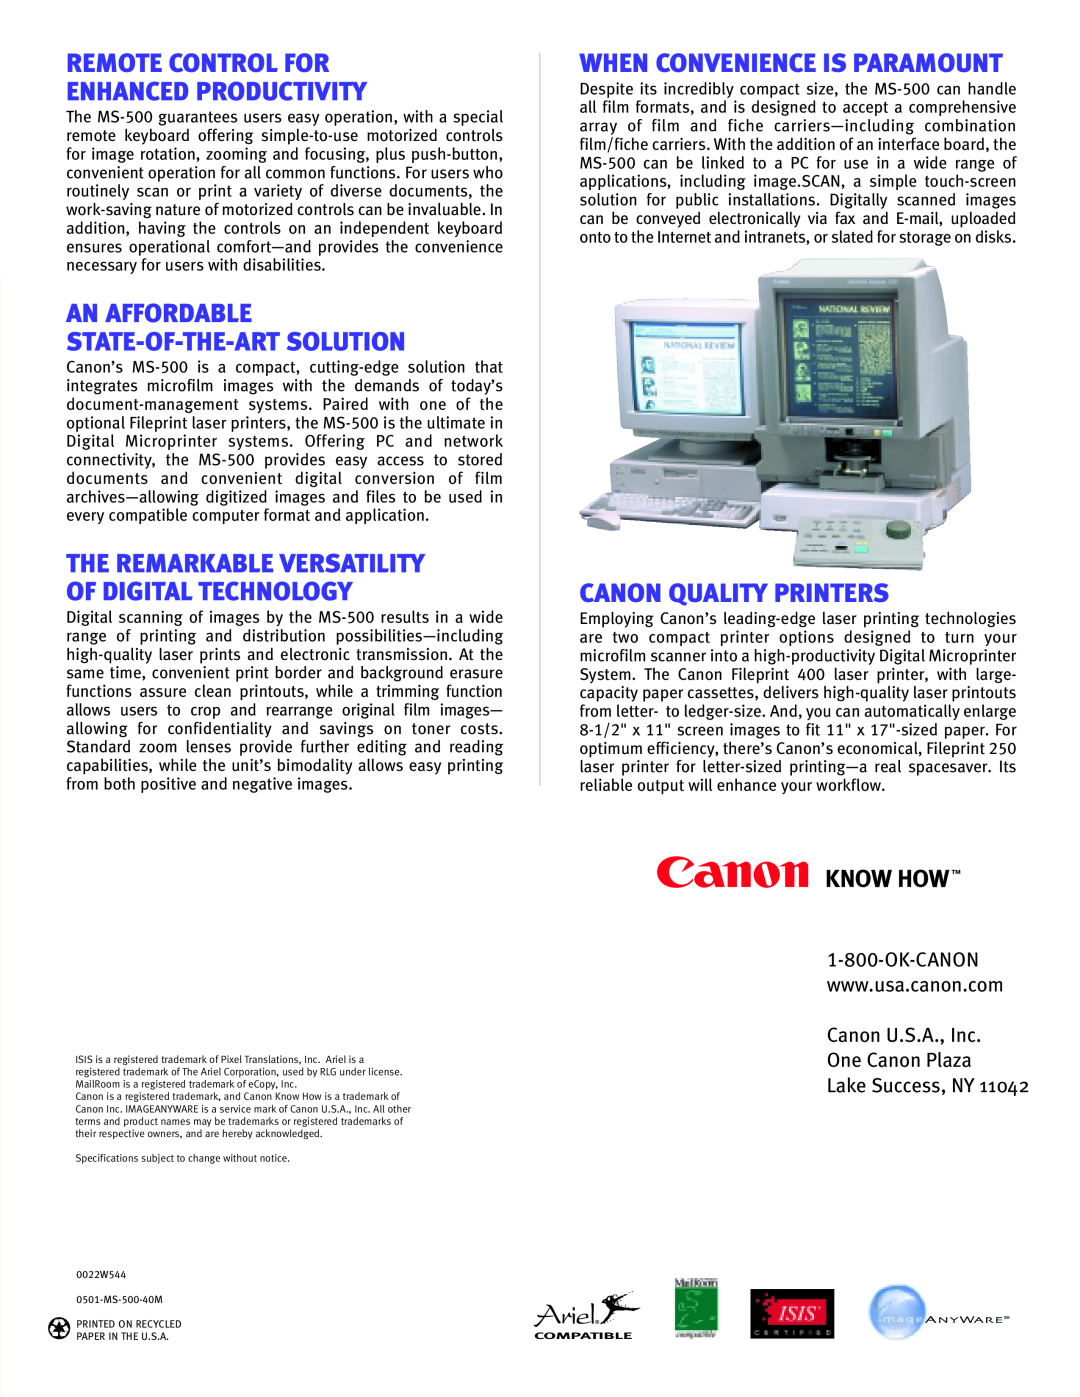 Canon MS-500 manual Remote Control For Enhanced Productivity, When Convenience Is Paramount, Canon Quality Printers 